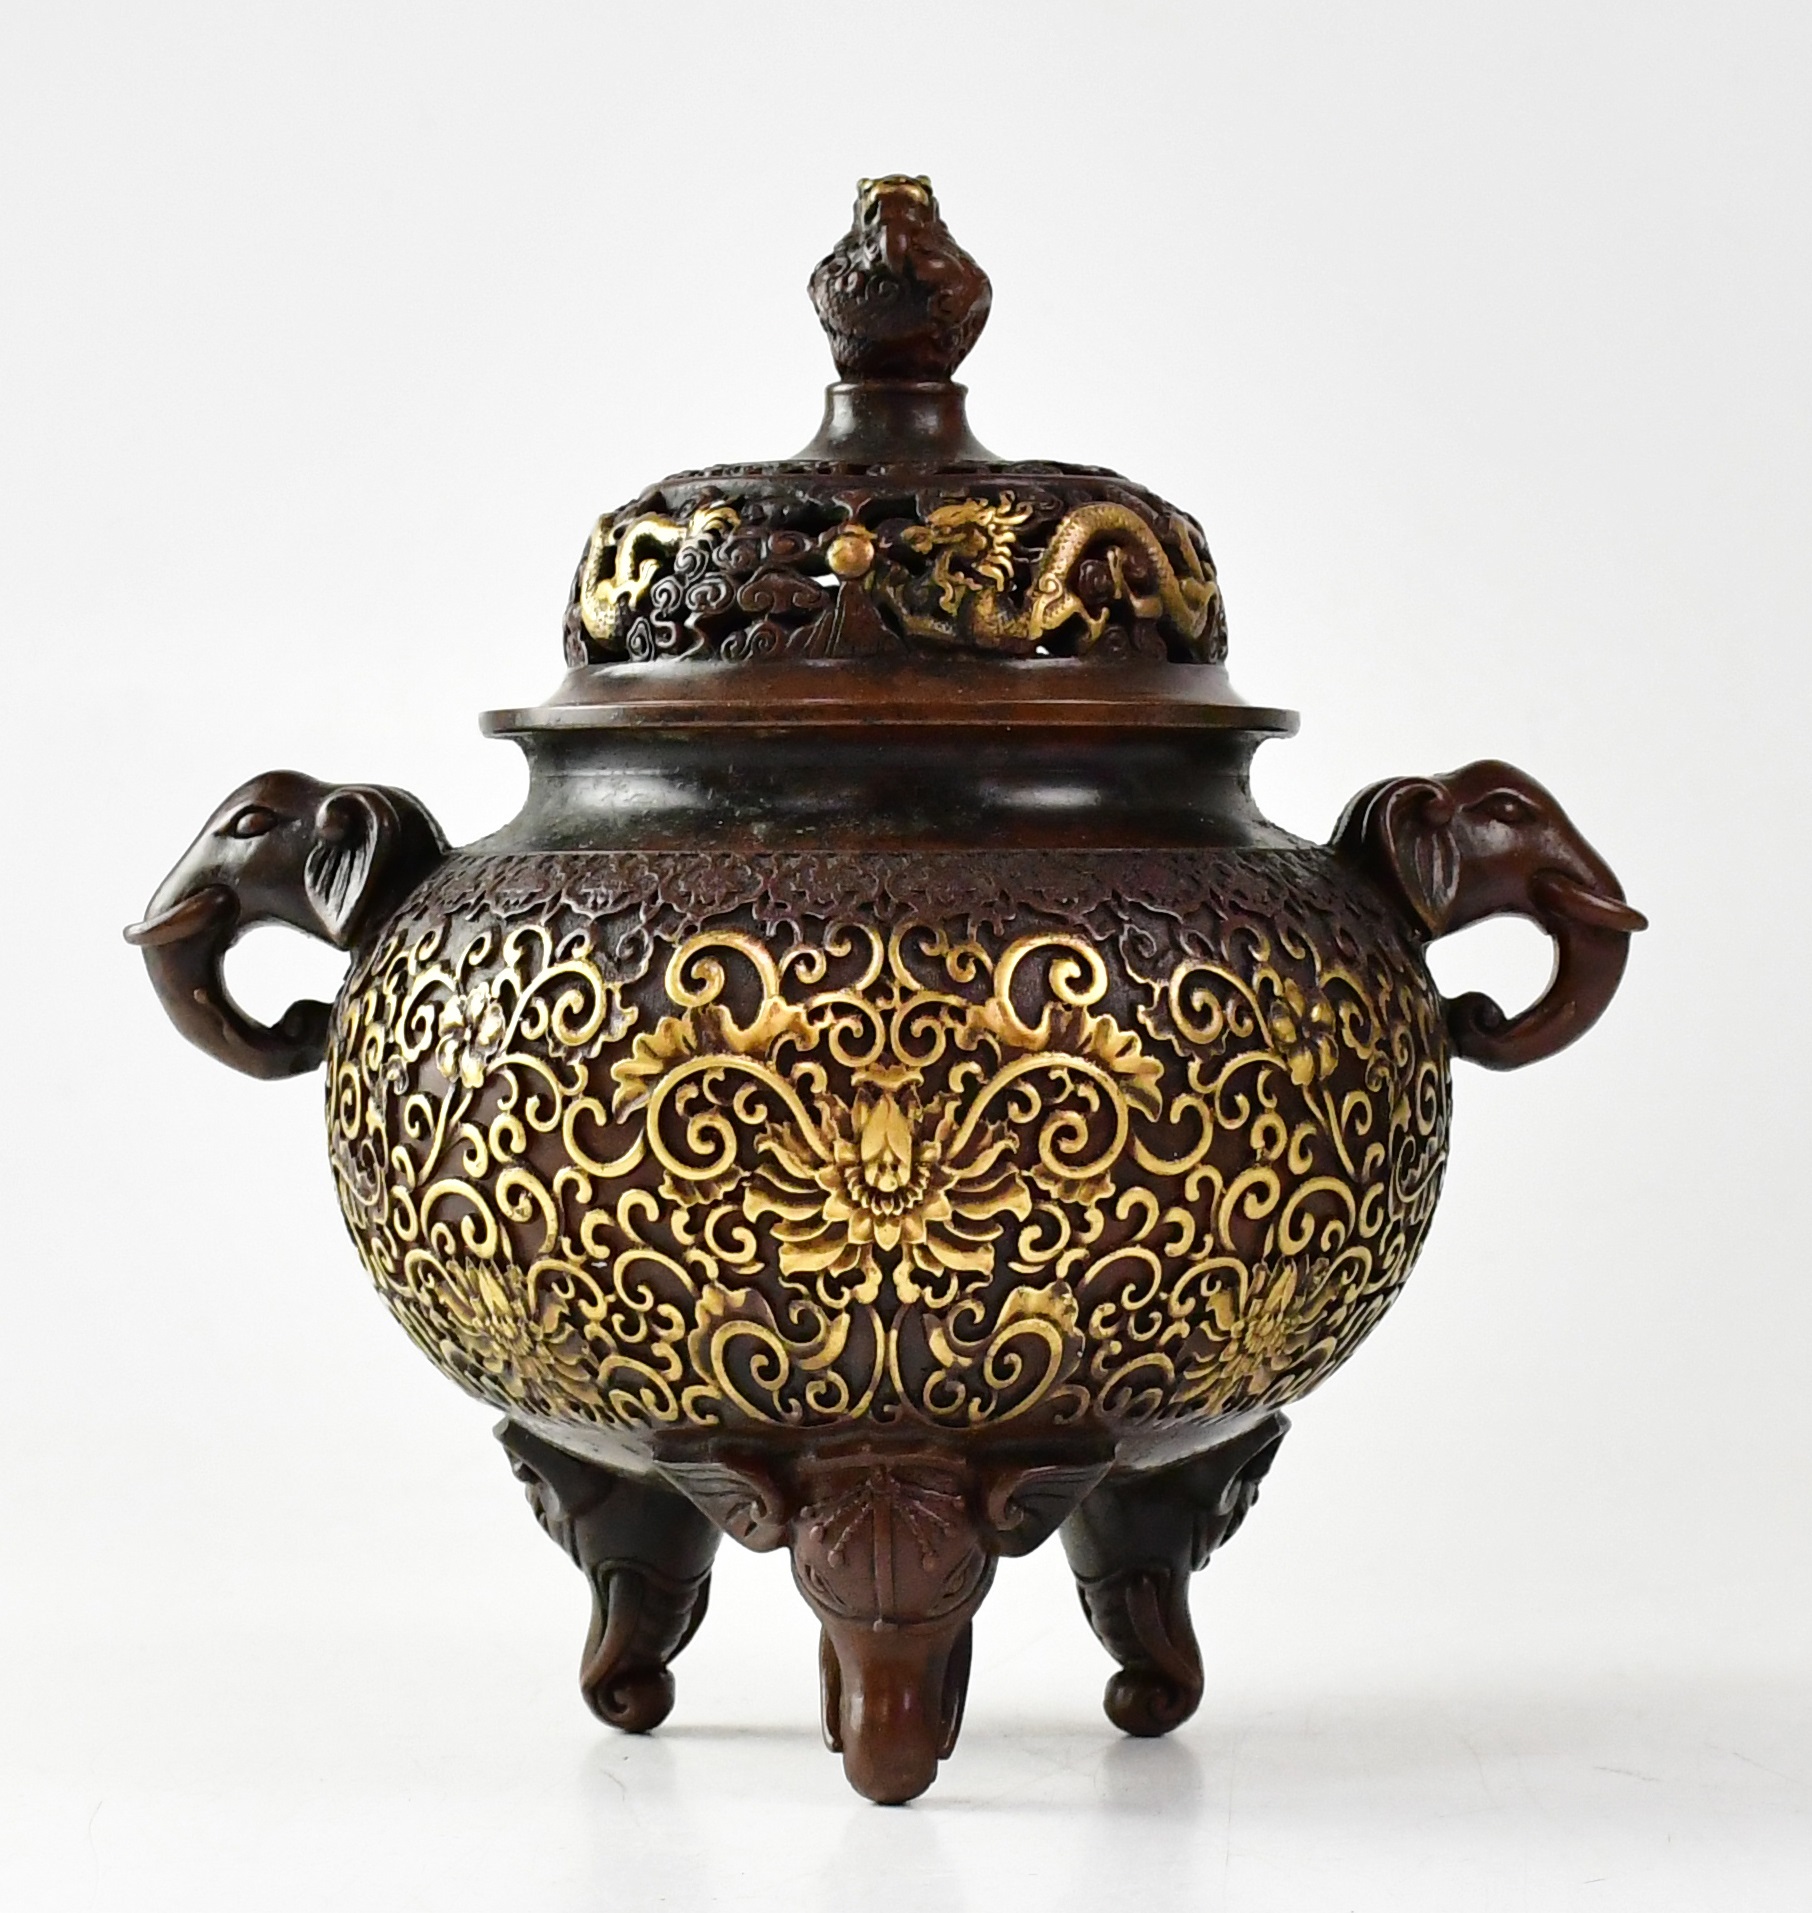 Asian Art with Antiques & Collectors’ Items (Liverpool)